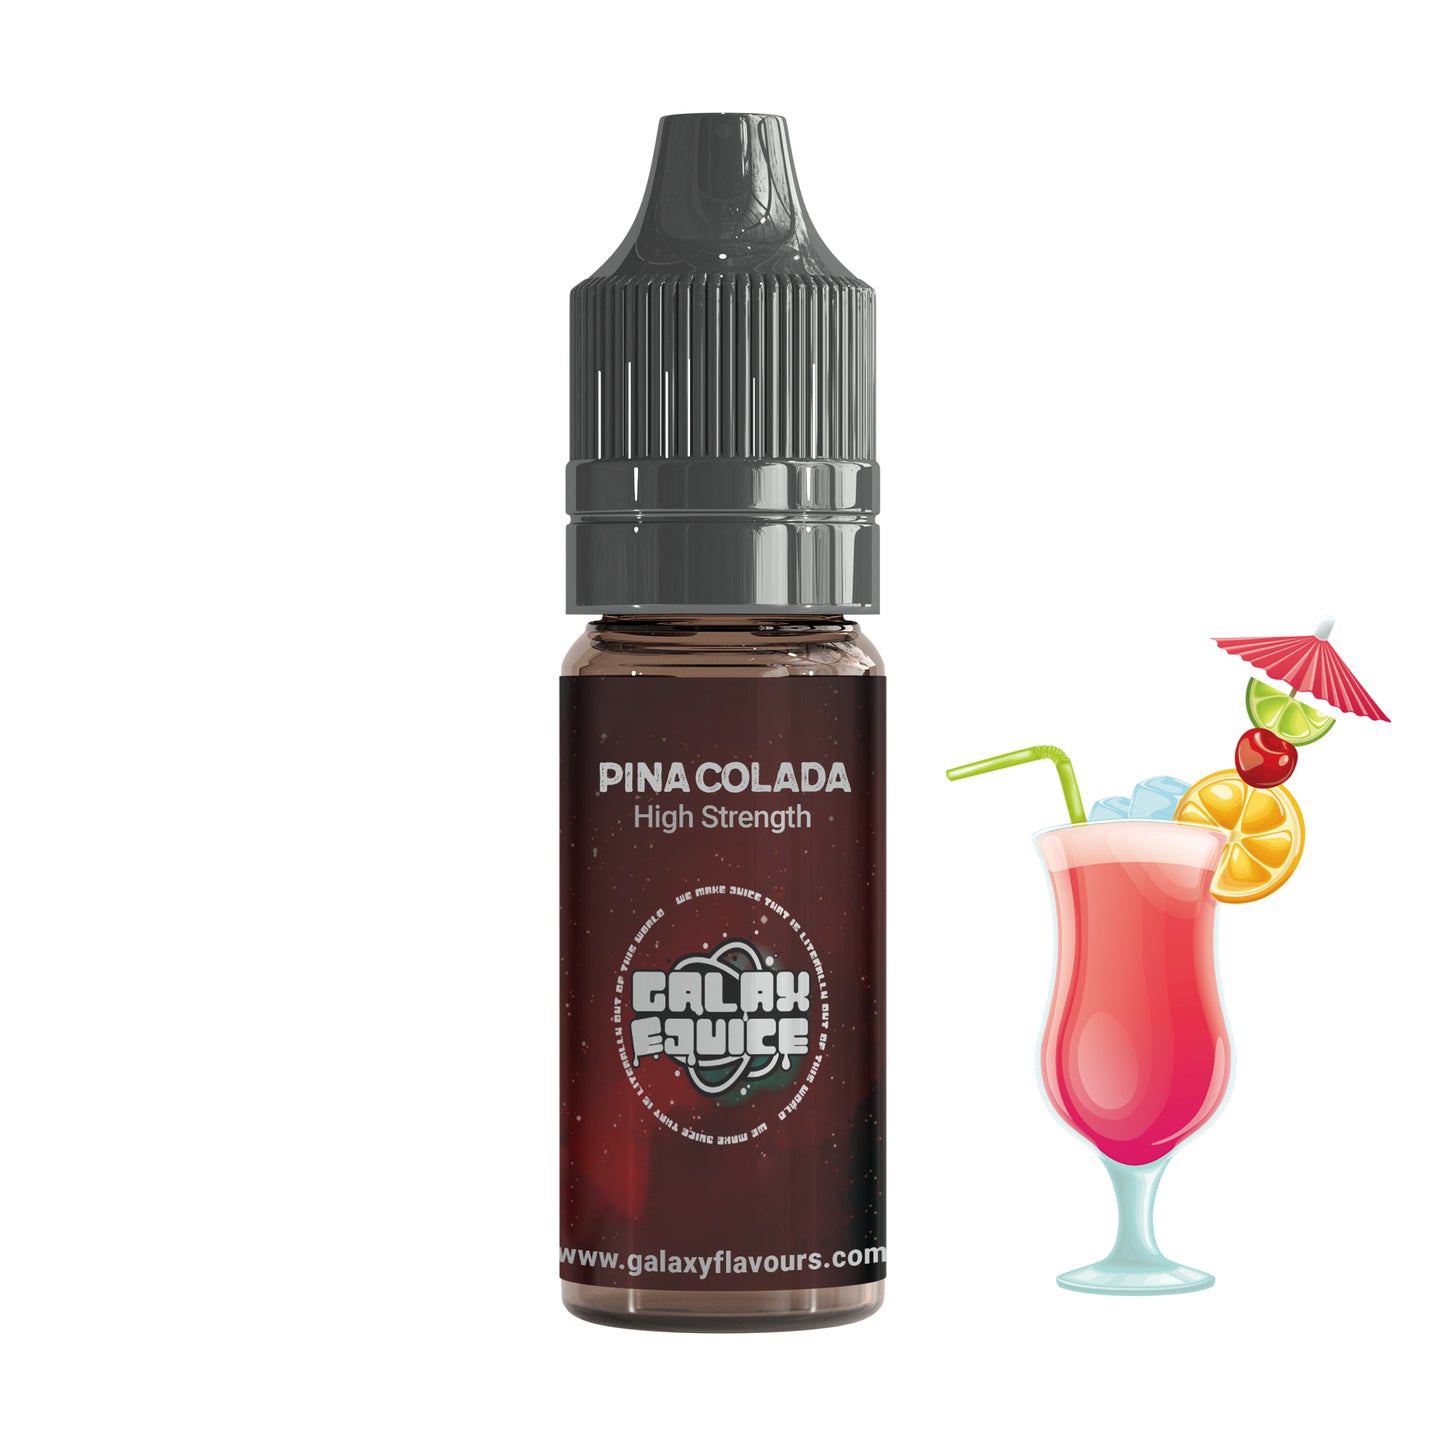 Pina Colada High Strength Professional Flavouring.